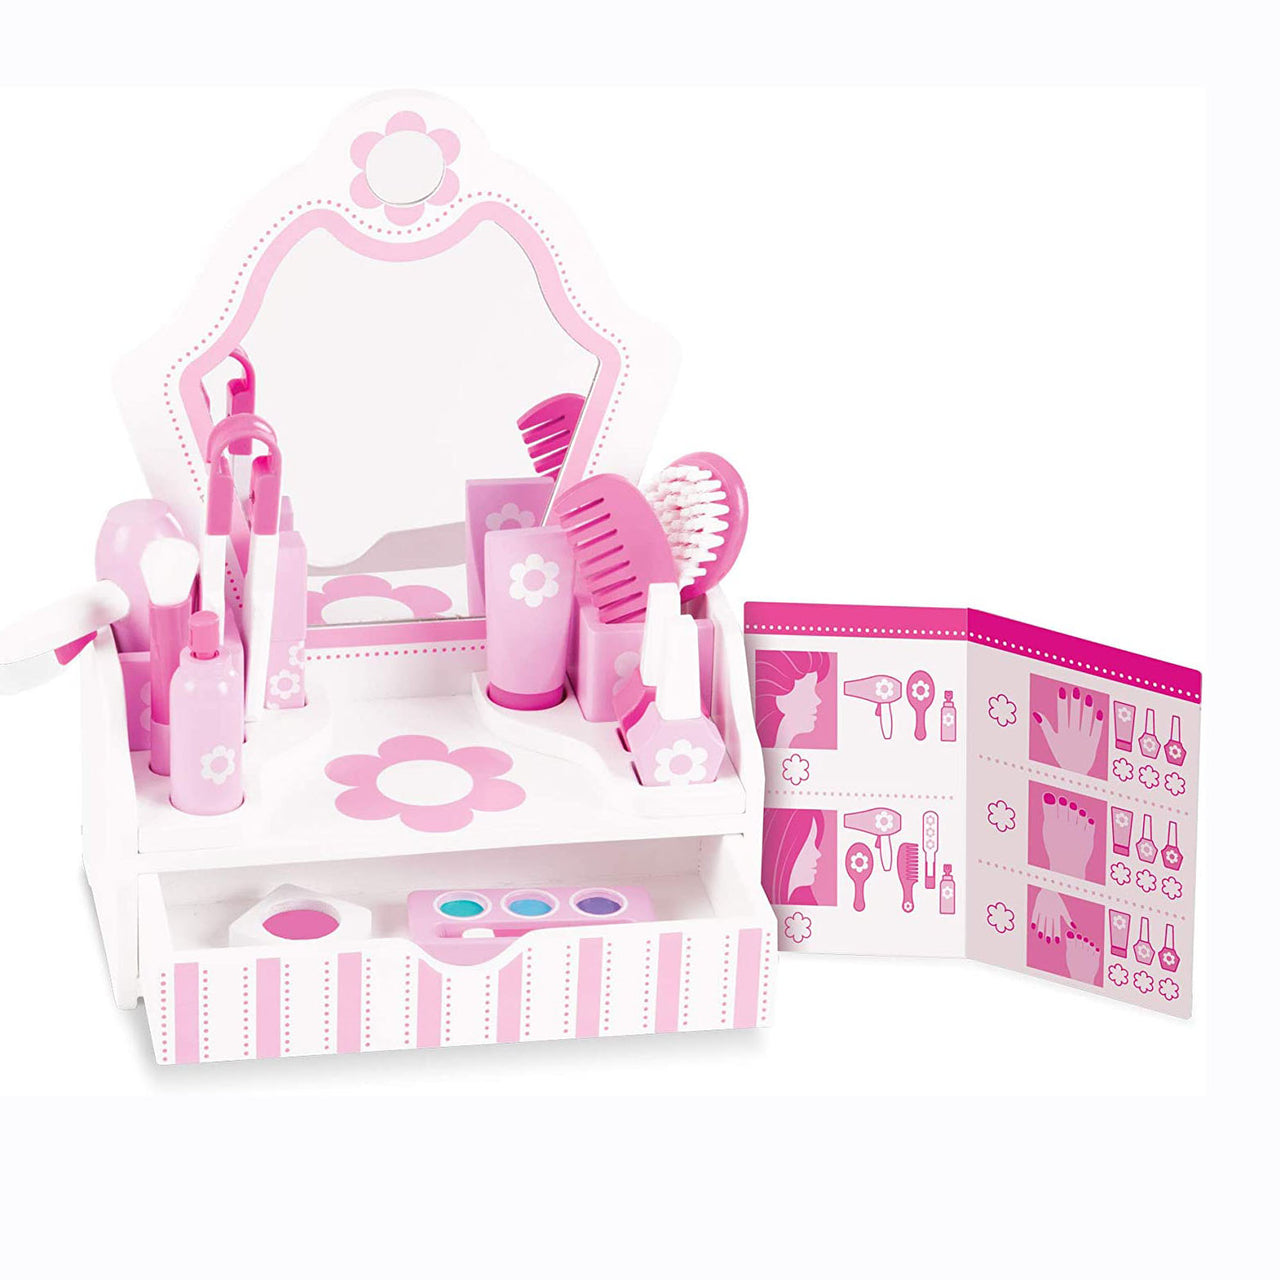 Add glamour and style to playtime with these wooden beauty essentials for make-believe makeovers! The 18-piece set includes a sturdy white and pink vanity with mirror and storage drawer. The wooden pieces include a hair dryer, hair spray, hair straightener, flip-top lotion bottle, lipstick, two nail polish bottles, blush, makeup brush, eye shadow and applicator, comb, and brush. 